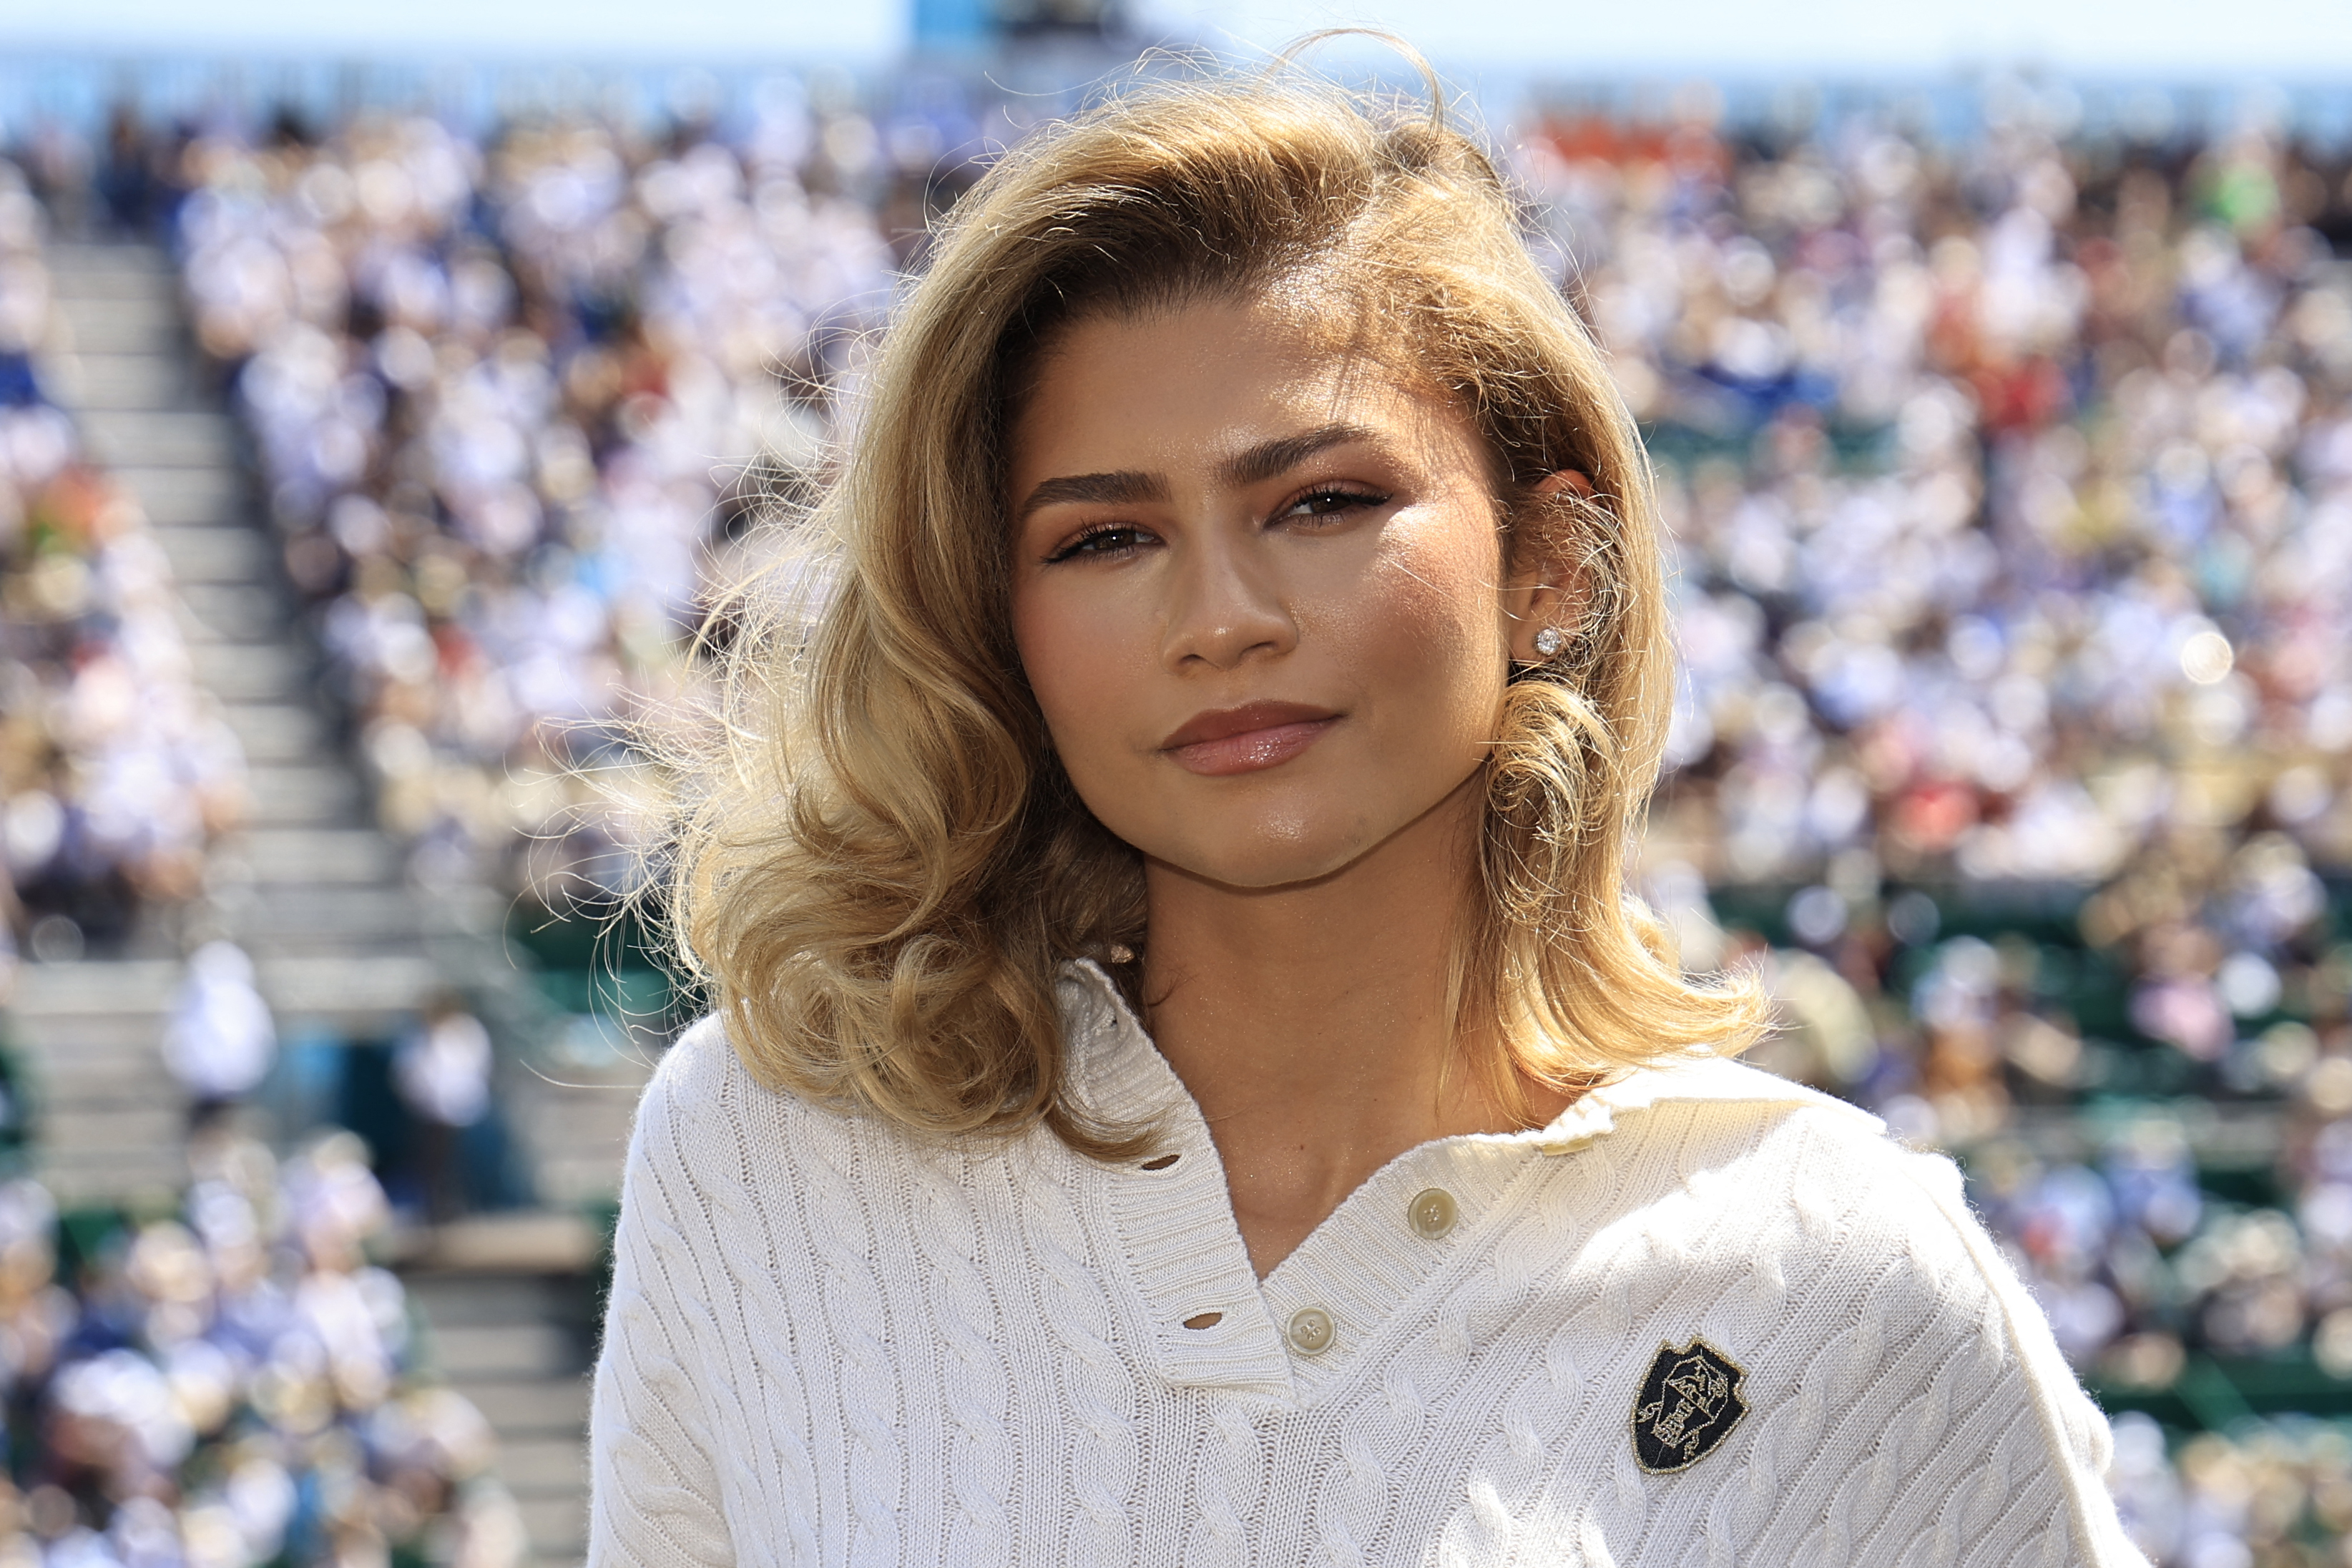 Zendaya in a collared sweater, at an outdoor event with blurred crowd in the background